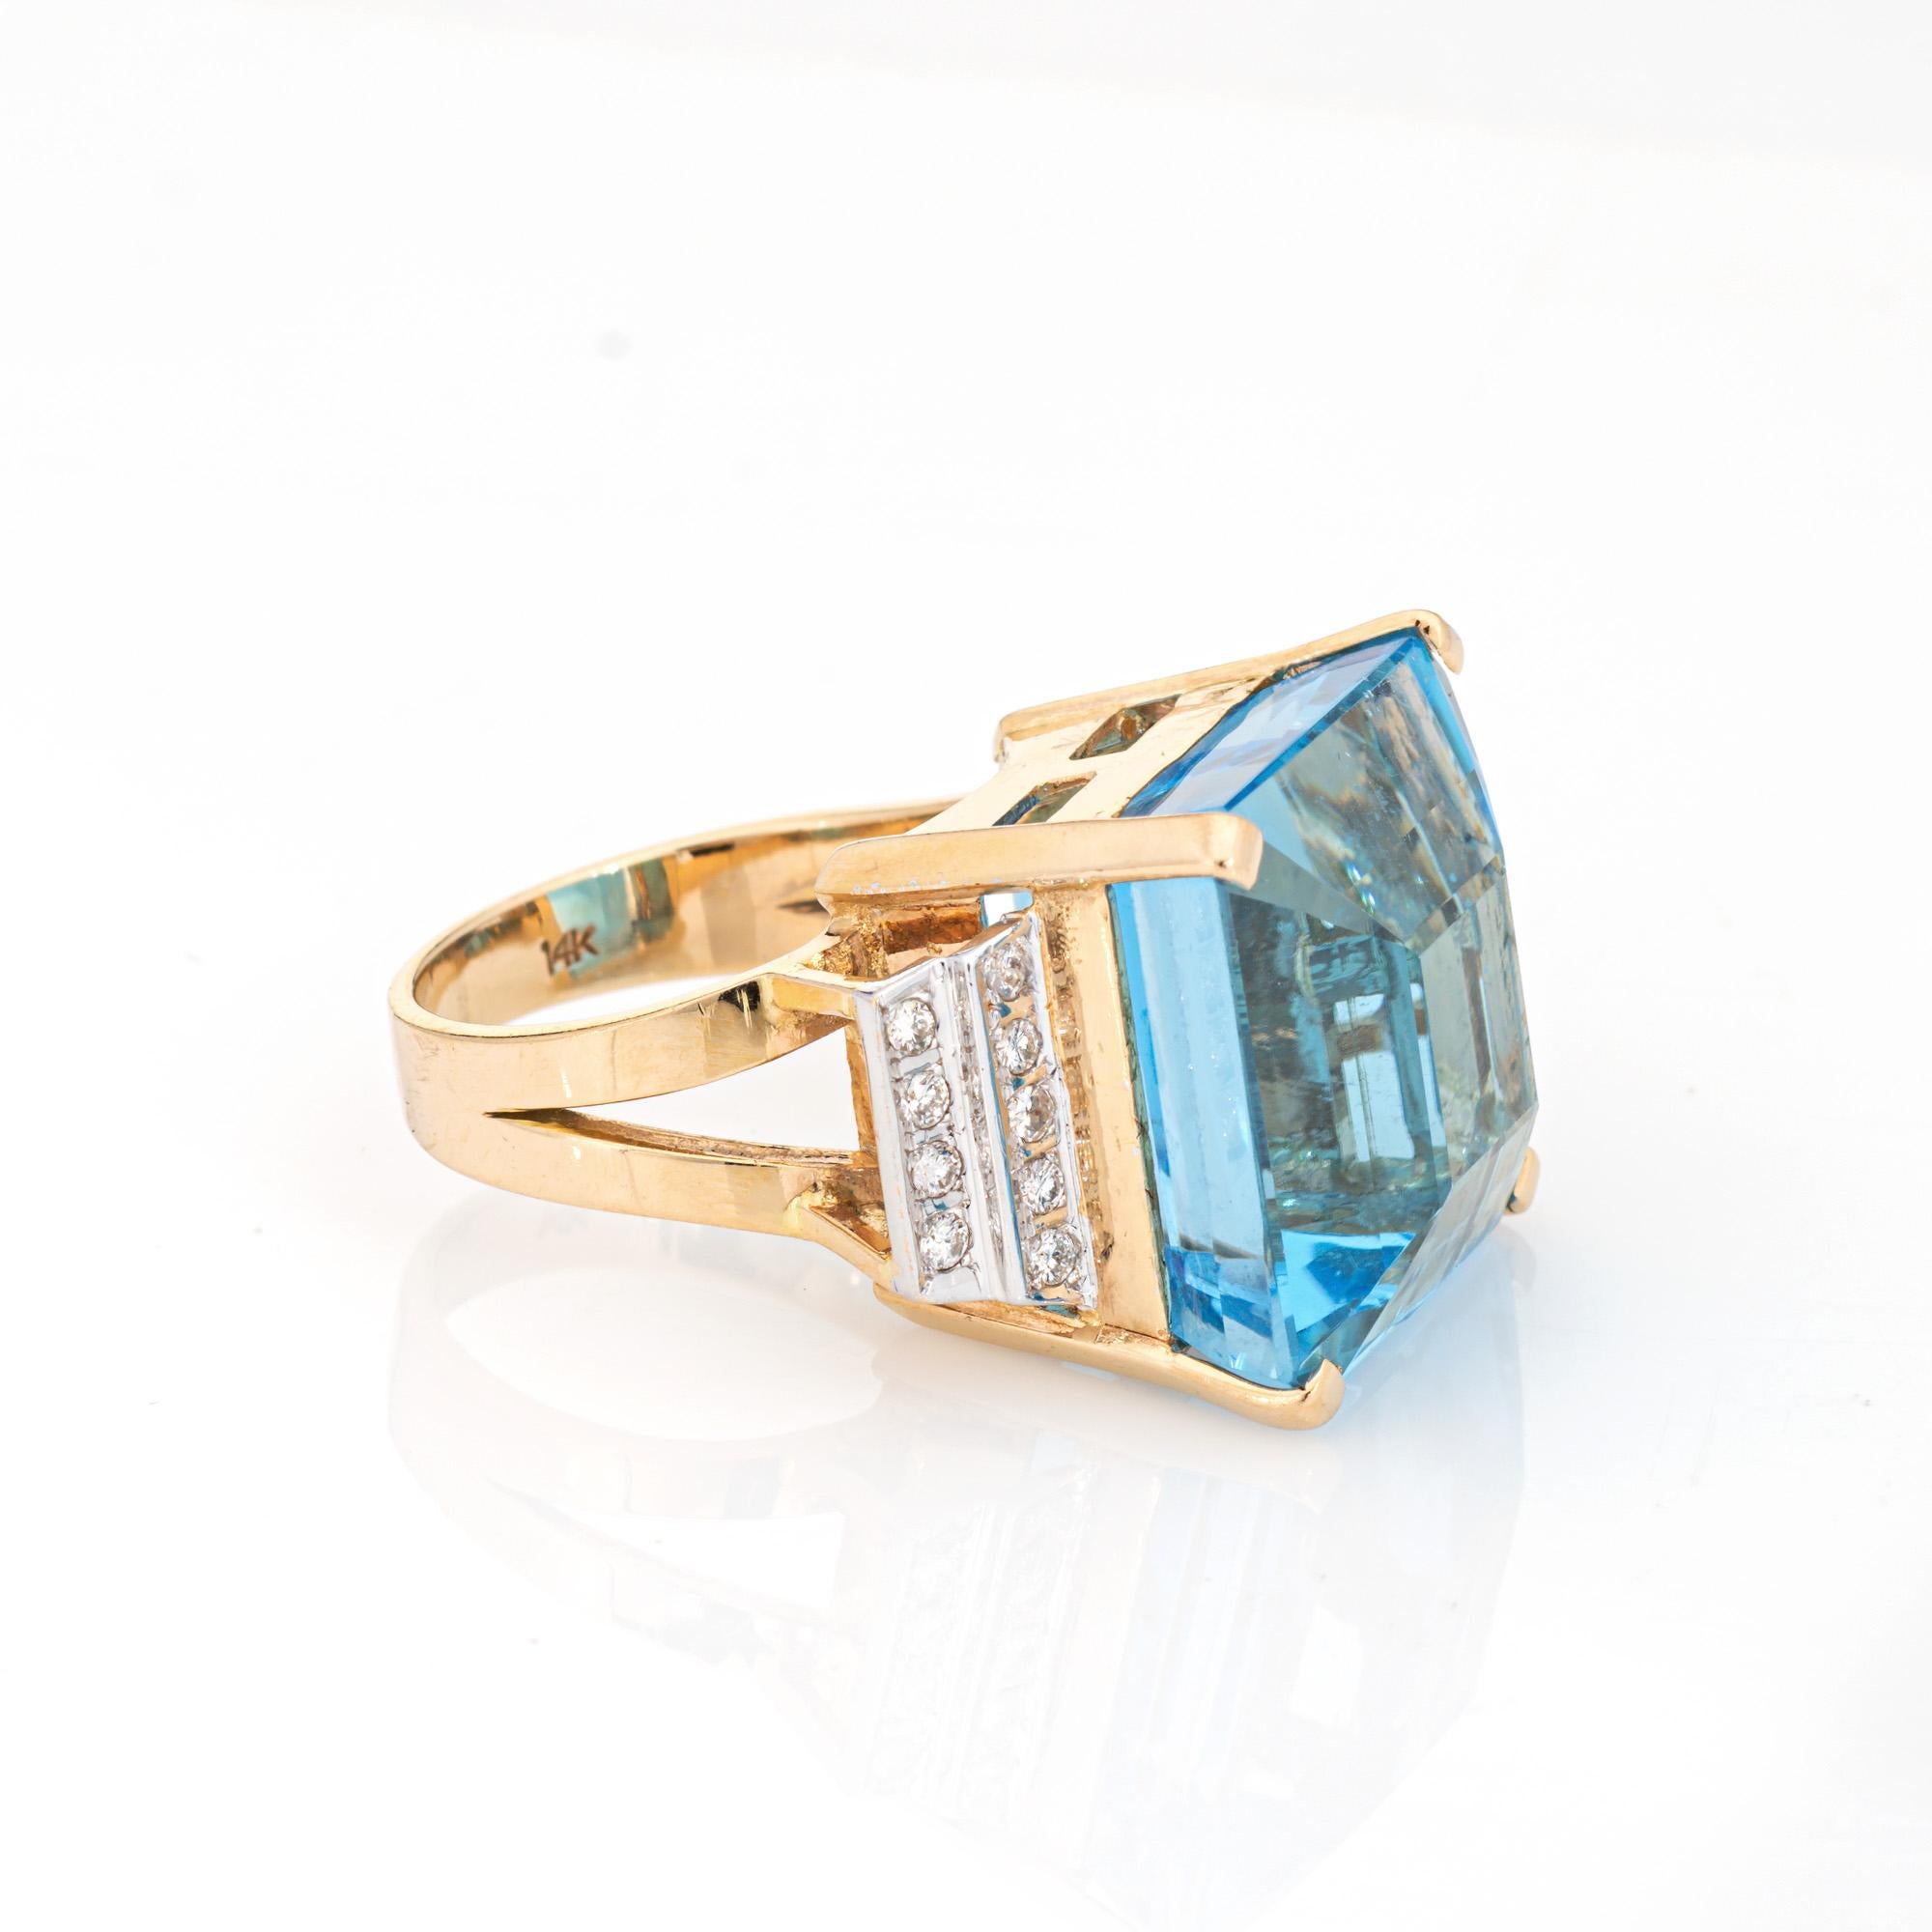 Modern 35ct Blue Topaz Diamond Ring Vintage 14k Yellow Gold Large Cocktail Jewelry Sz 7 For Sale